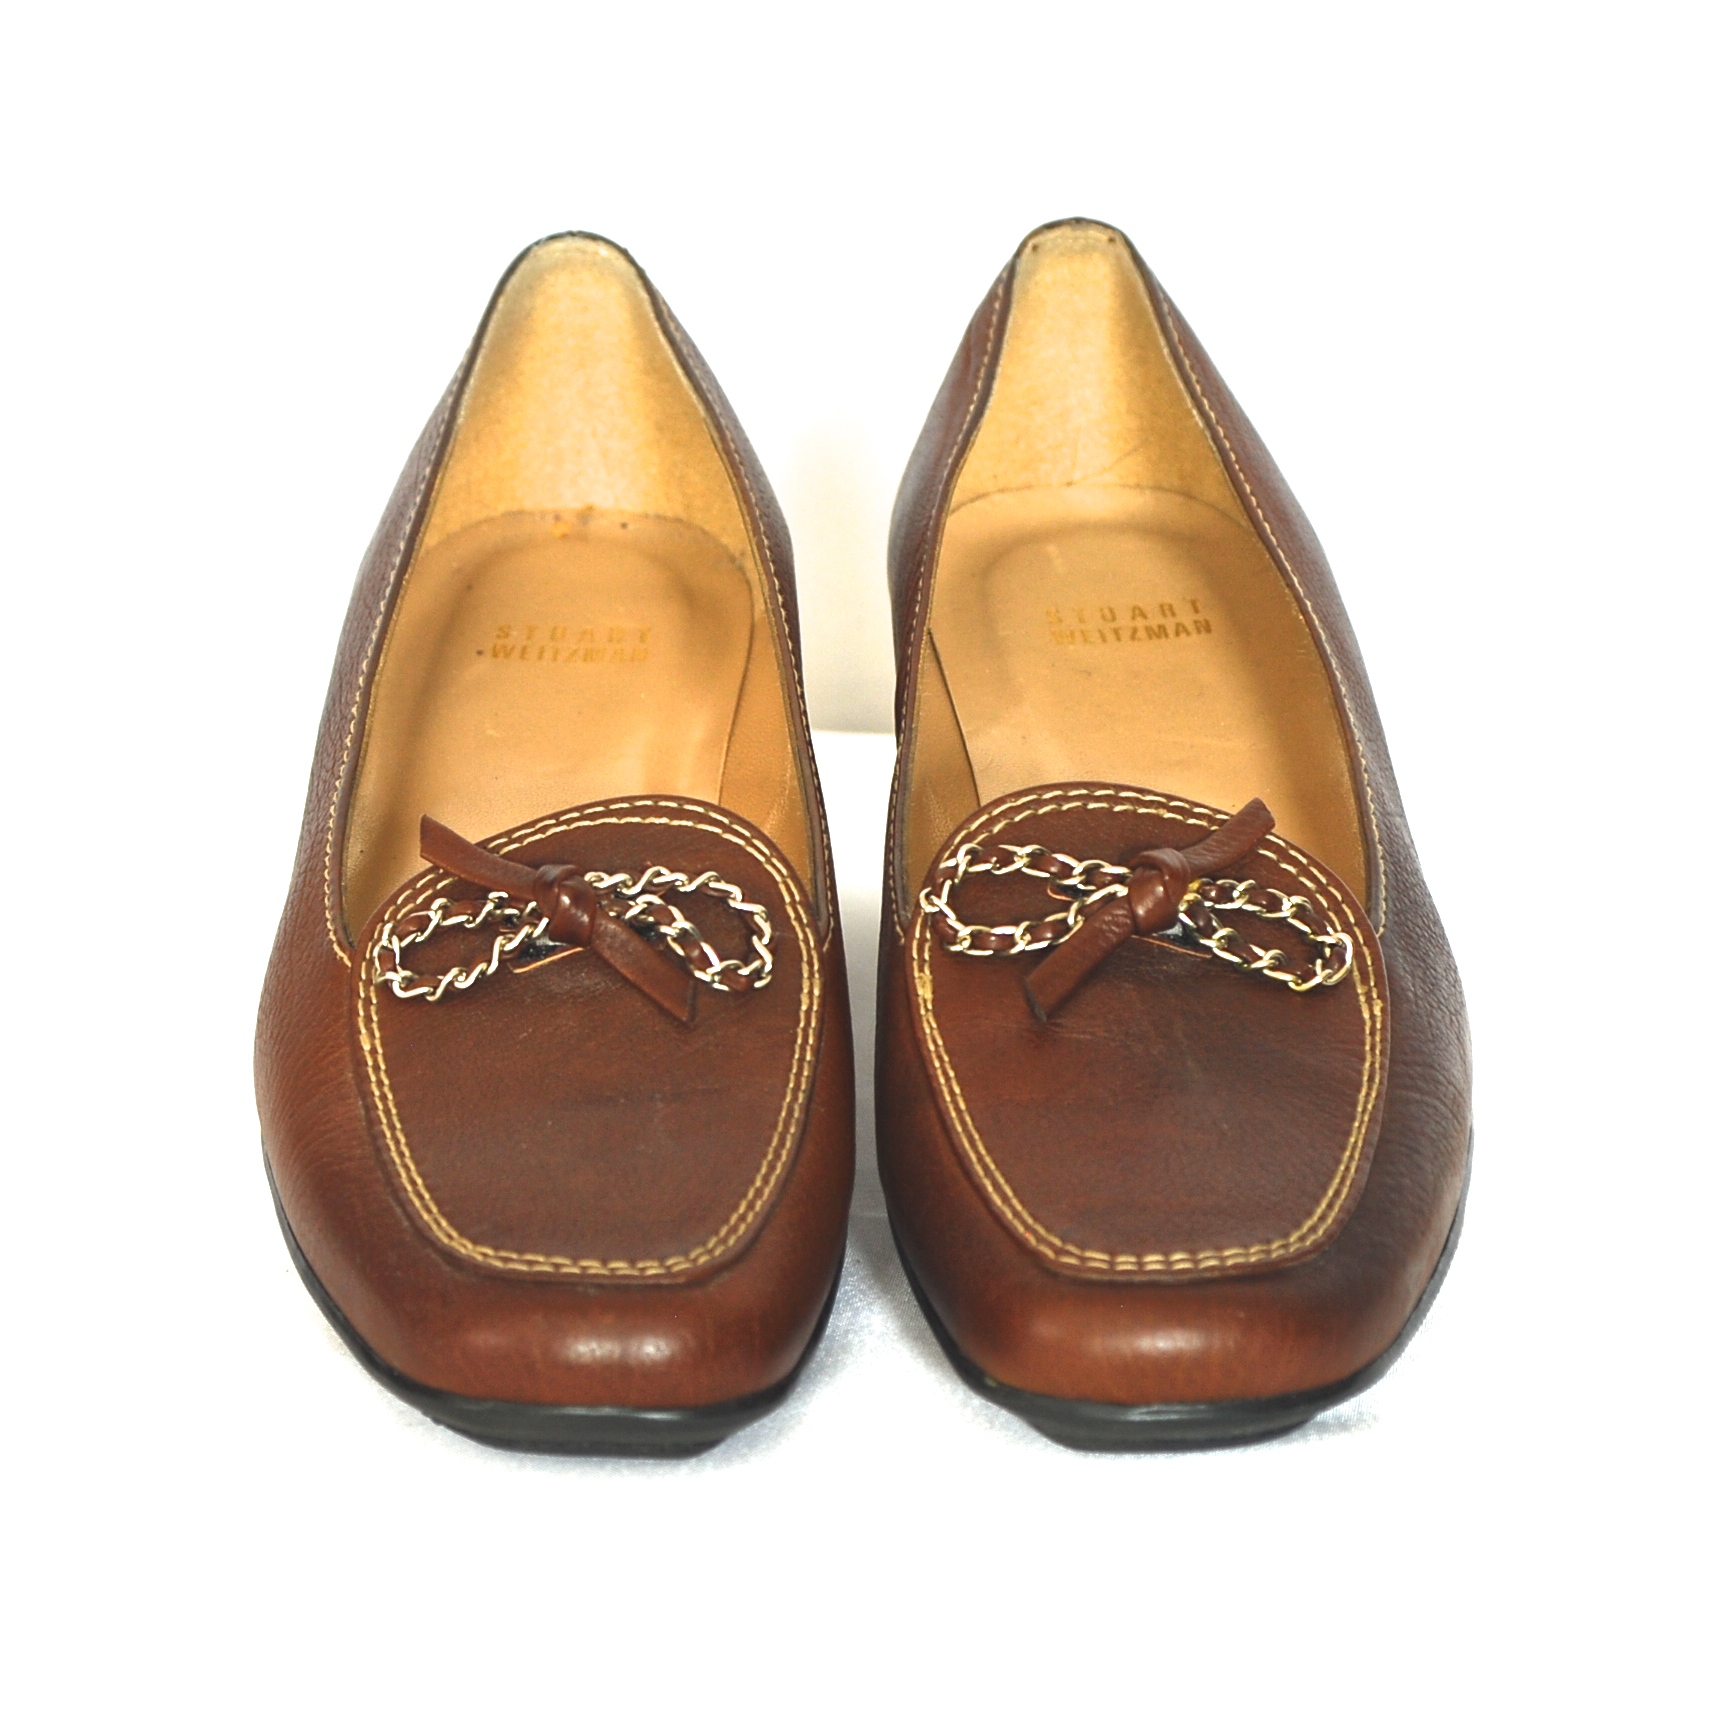 Stuart Weitzman Flat Brown Leather Shoes With Chain & Leather Bow ...